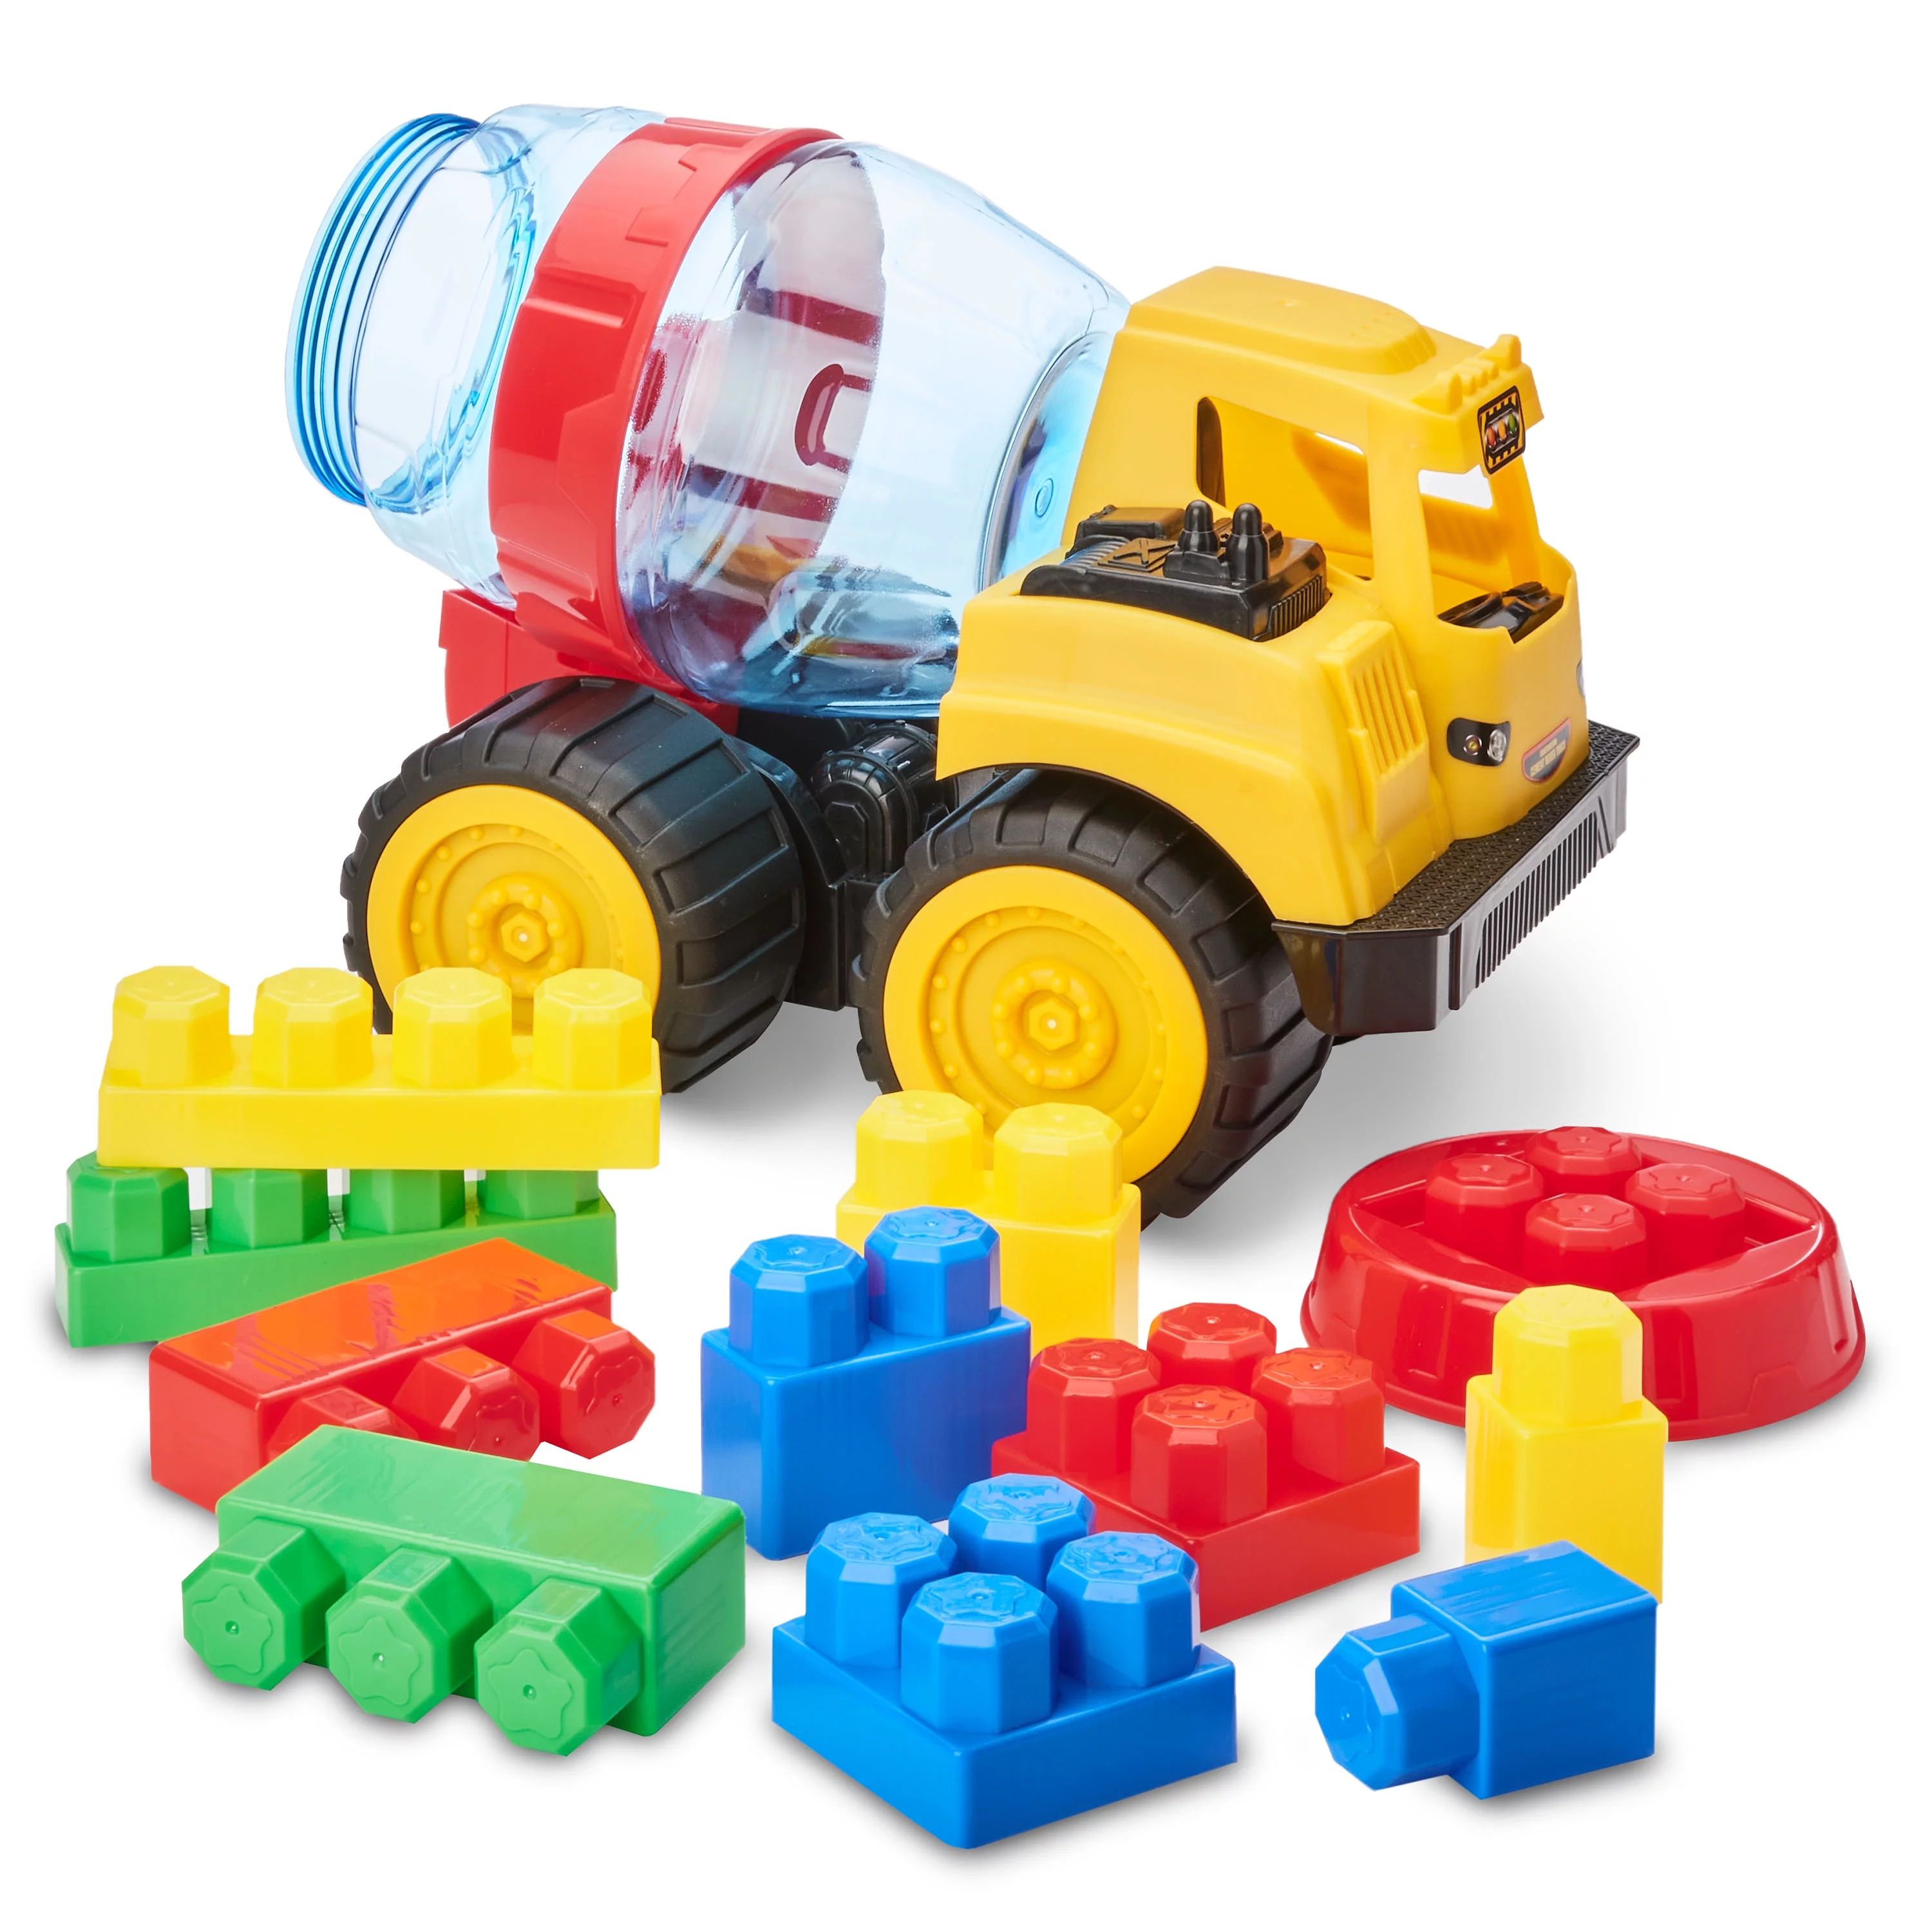 Kid Connection Construction Truck with Blocks Play Set, 11 Pieces | Walmart (US)